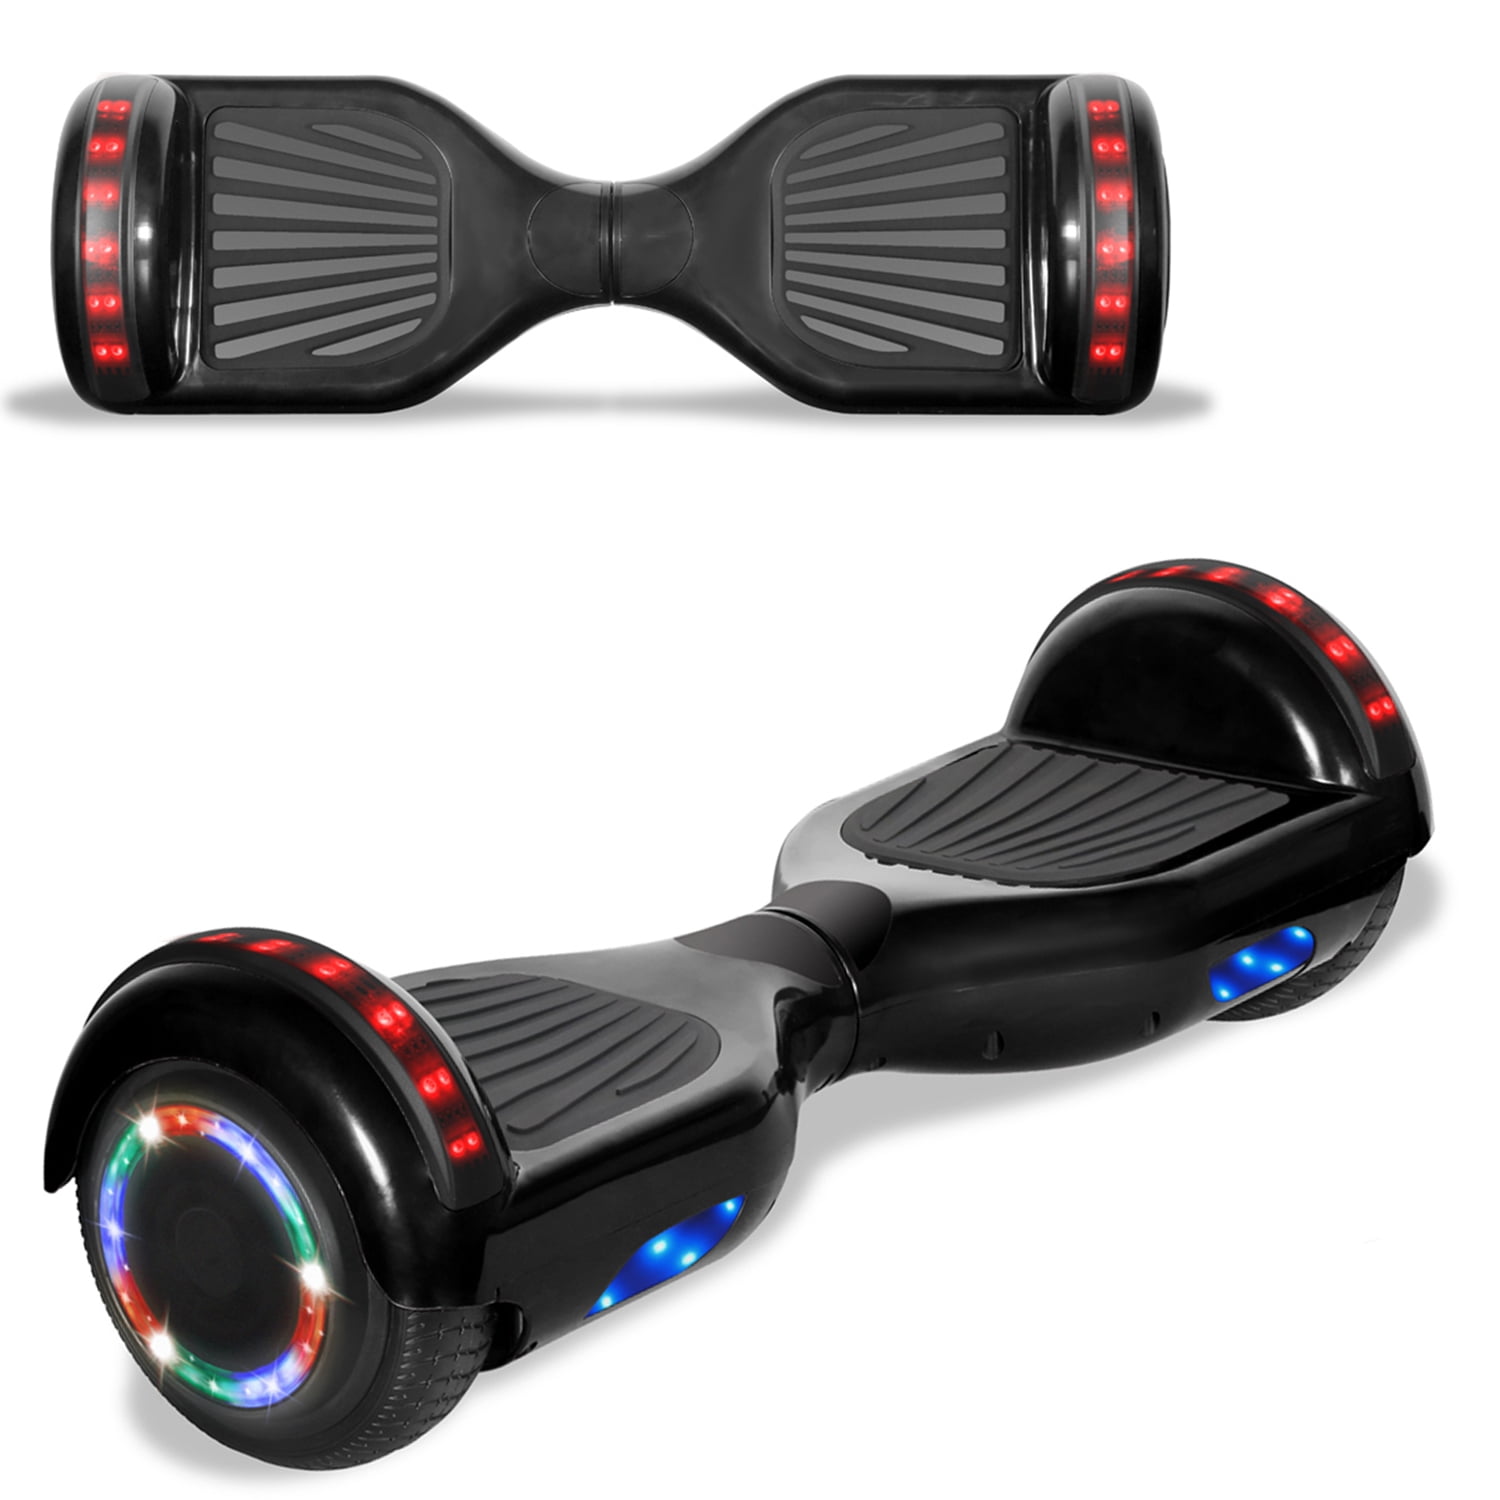 TOMOLOO Hoverboard for Kids Adults Two Wheel Self Balancing Scooter with Bluetooth Speaker and Led Lights Hover Board with 6.5 Flashing Wheels 